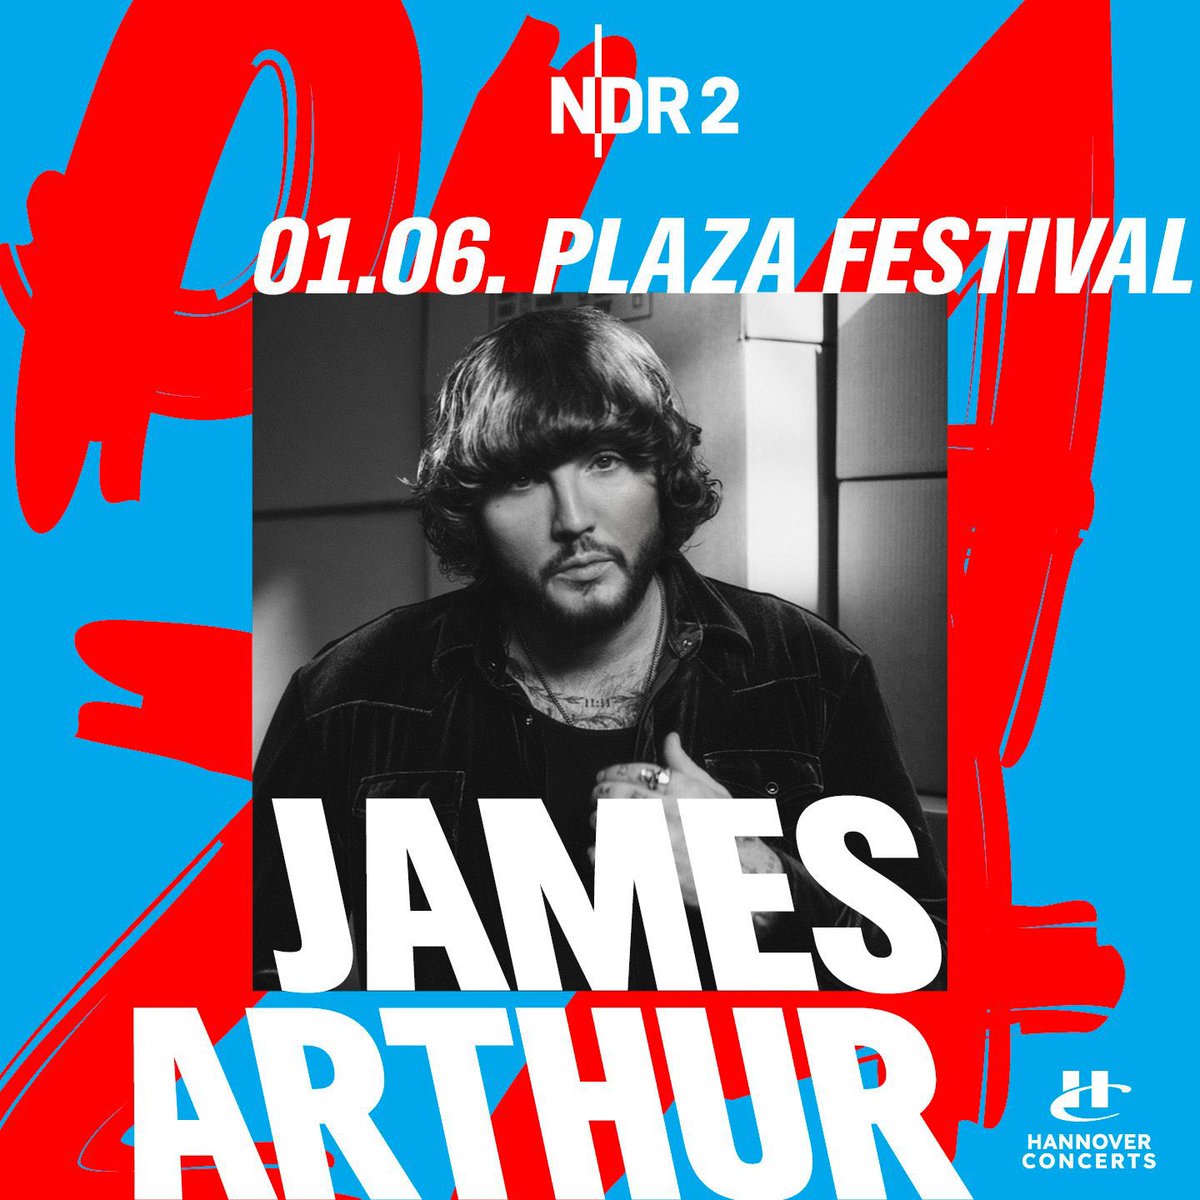 Due to scheduling difficulties, I will now be playing on the 1st of June at the NDR 2 Plaza Festival in Hannover. All ticket buyers will get a customer mailing with all information and be able to change their tickets at no cost.